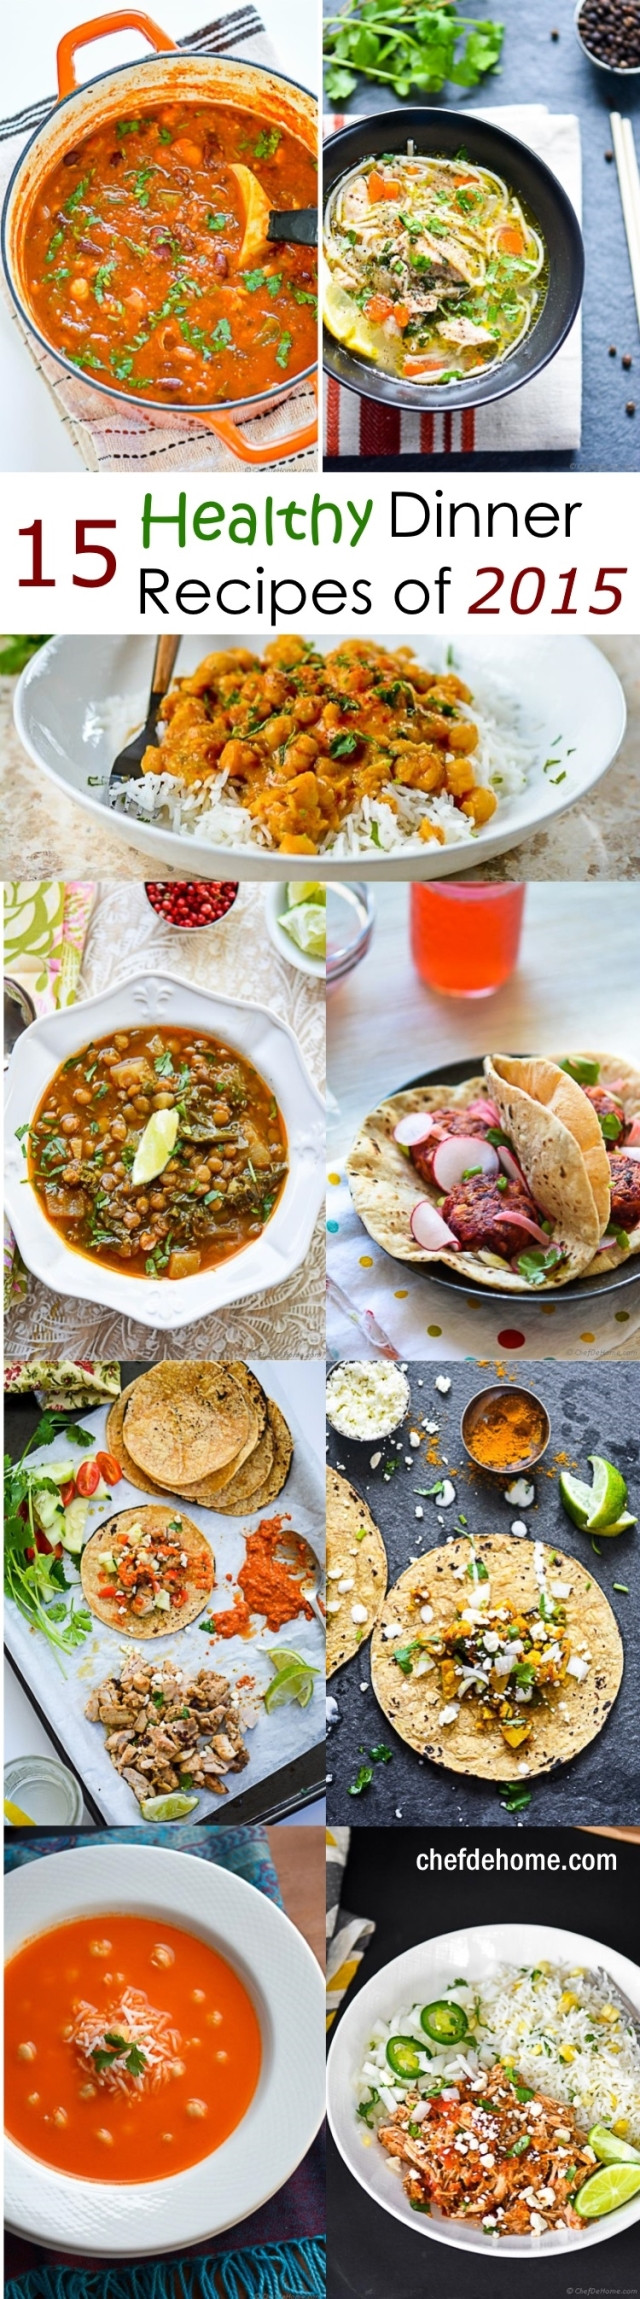 New Dinner Ideas
 15 Top Healthy Dinner Recipes for New Year Meals